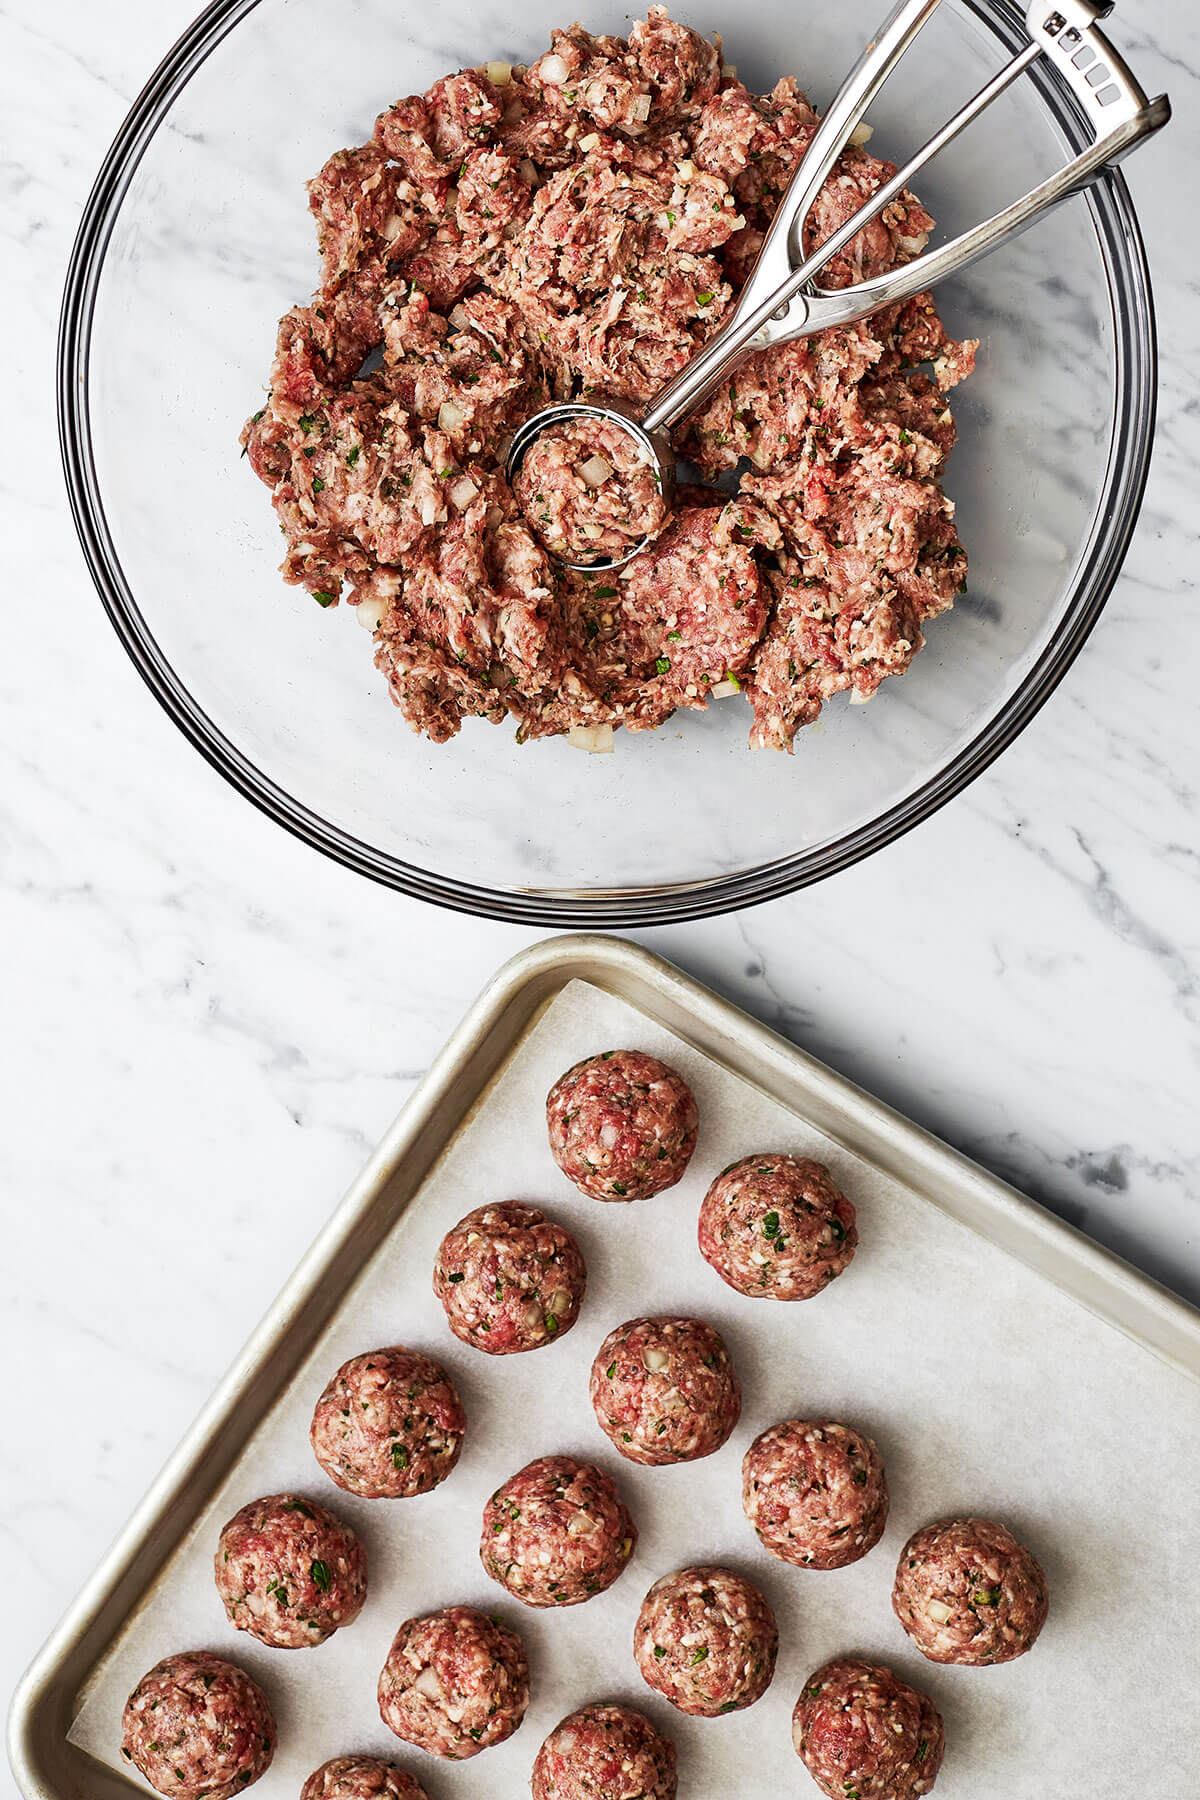 Forming meatballs and placing on a sheet pan